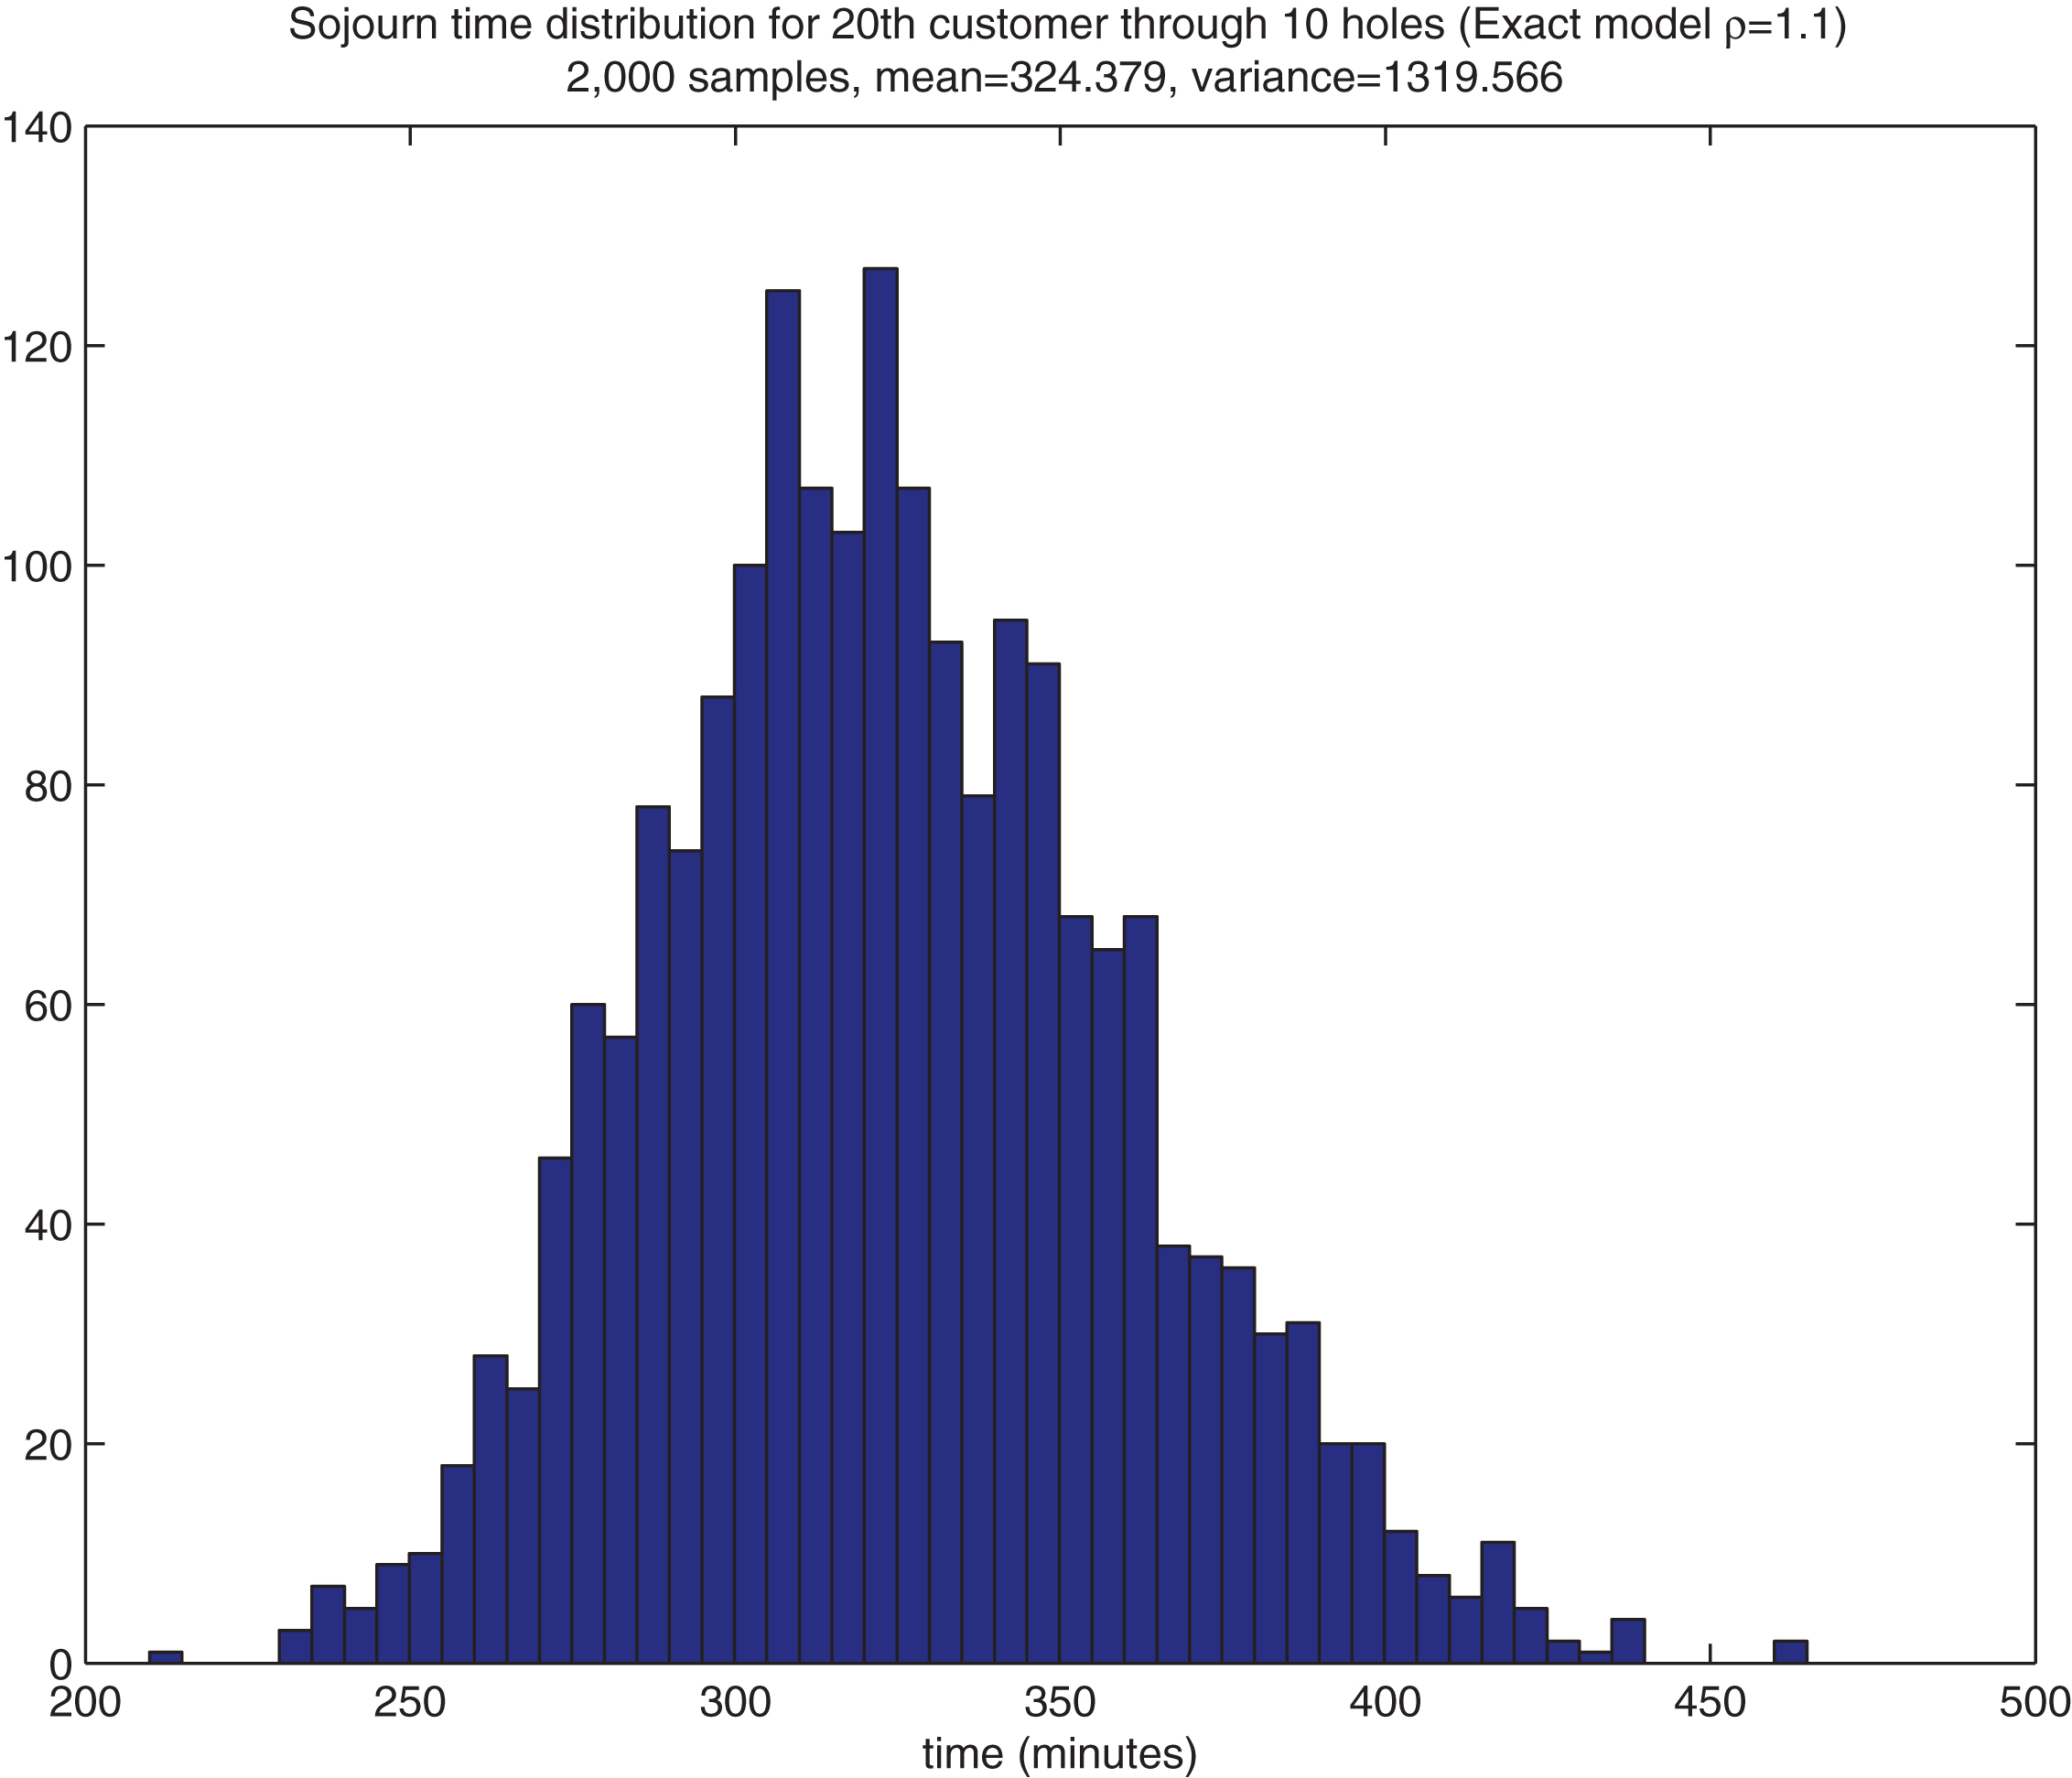 Histogram of the sojourn times V10,20 in the all exponential model with for ρ = 1.1.